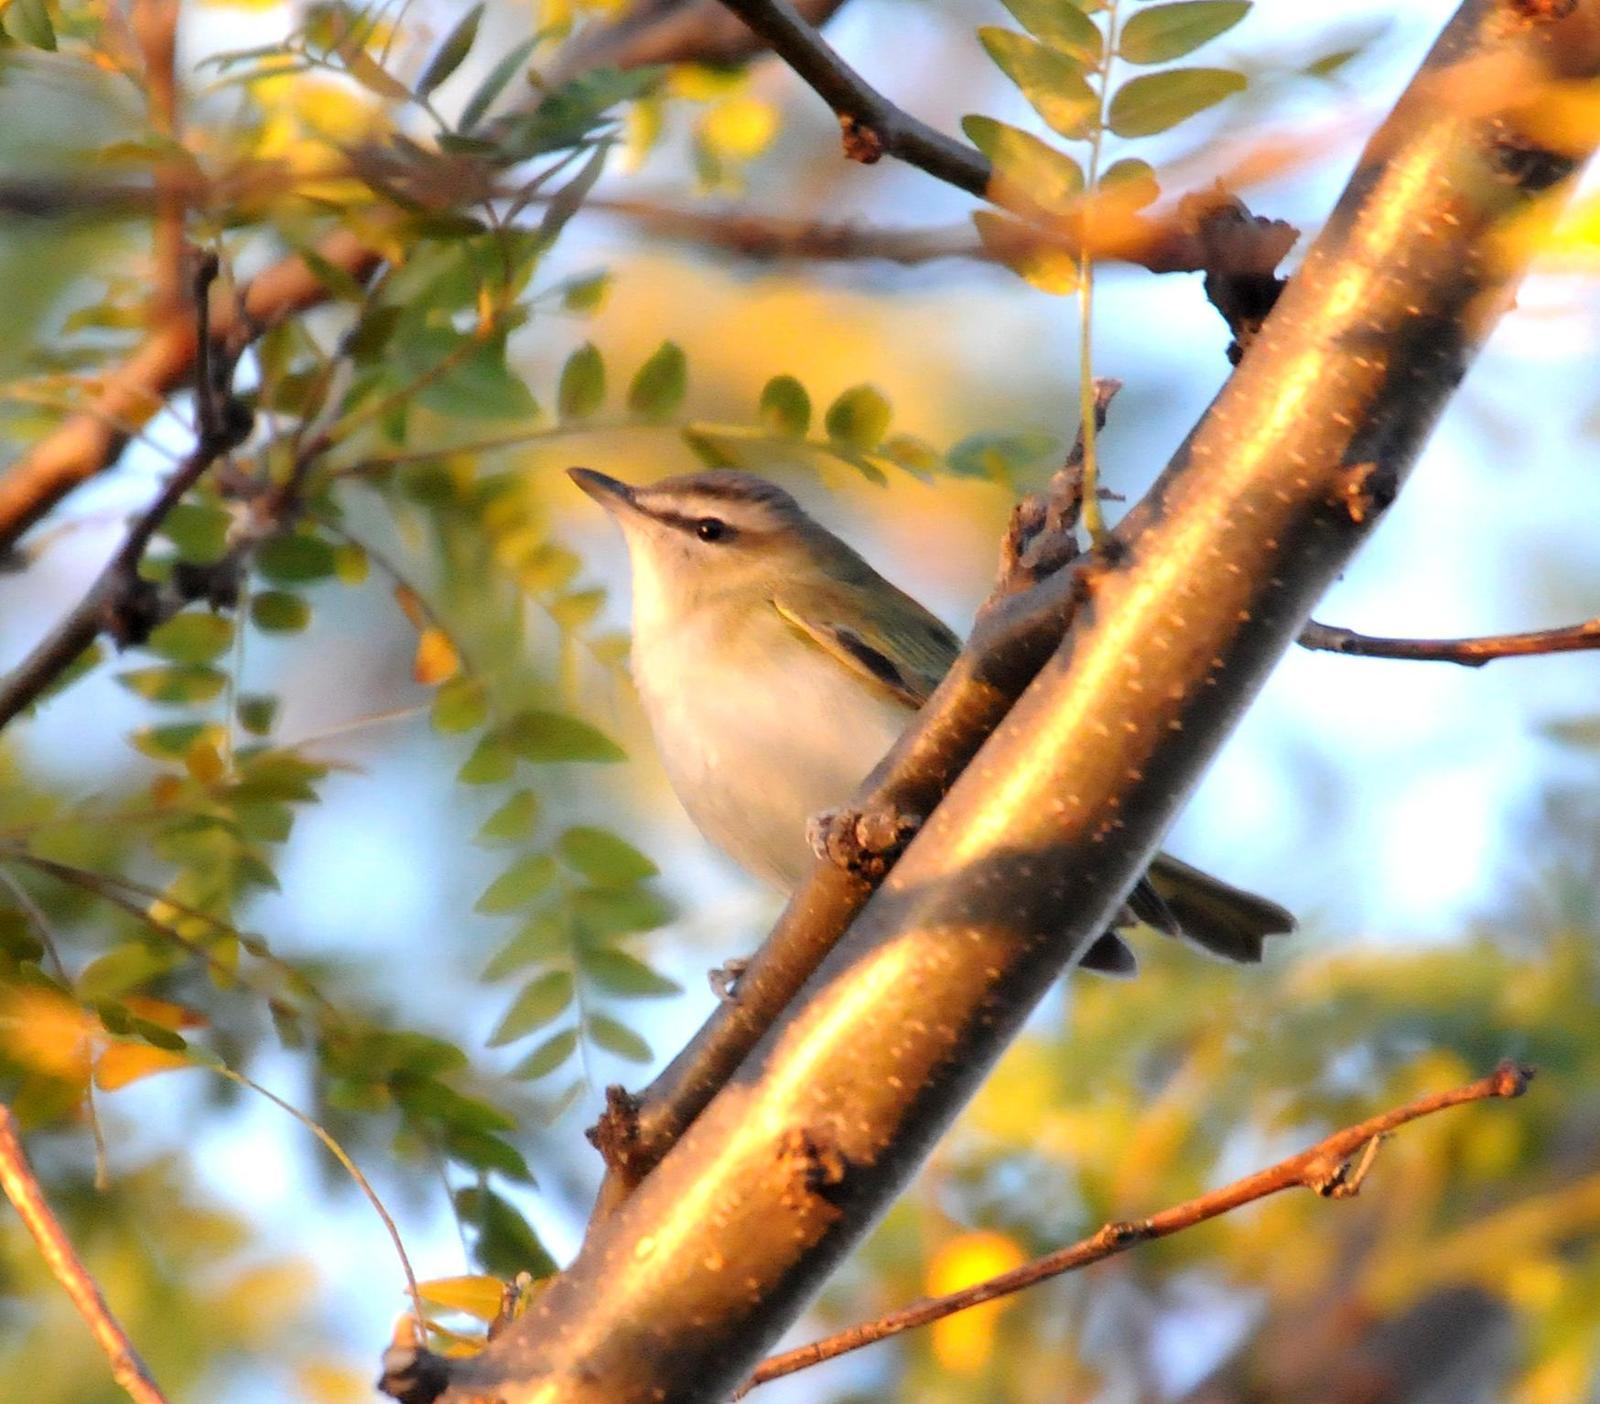 Red-eyed/Chivi Vireo Photo by Steven Mlodinow